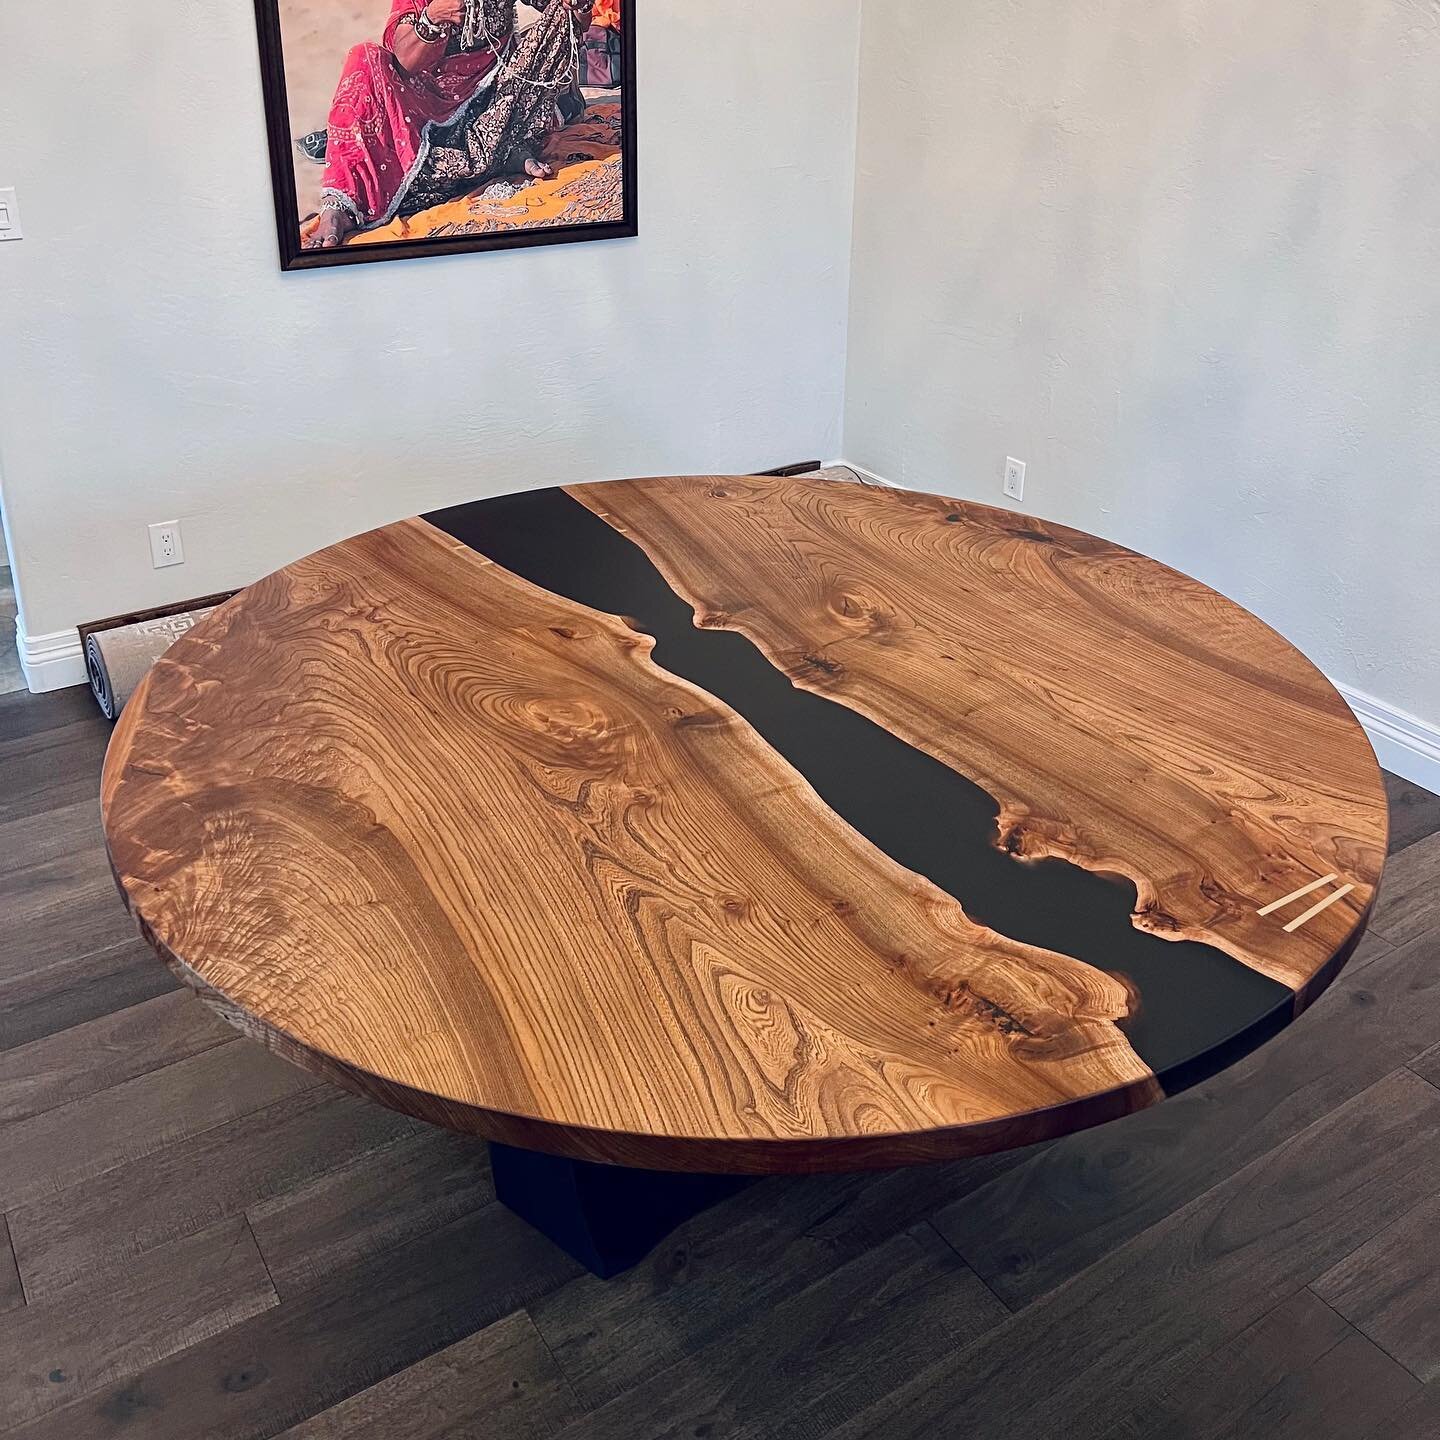 75&rdquo; Round Elm River Table with semi-translucent black epoxy and brass inlay. Seats 8 and creates memories that will last generations.